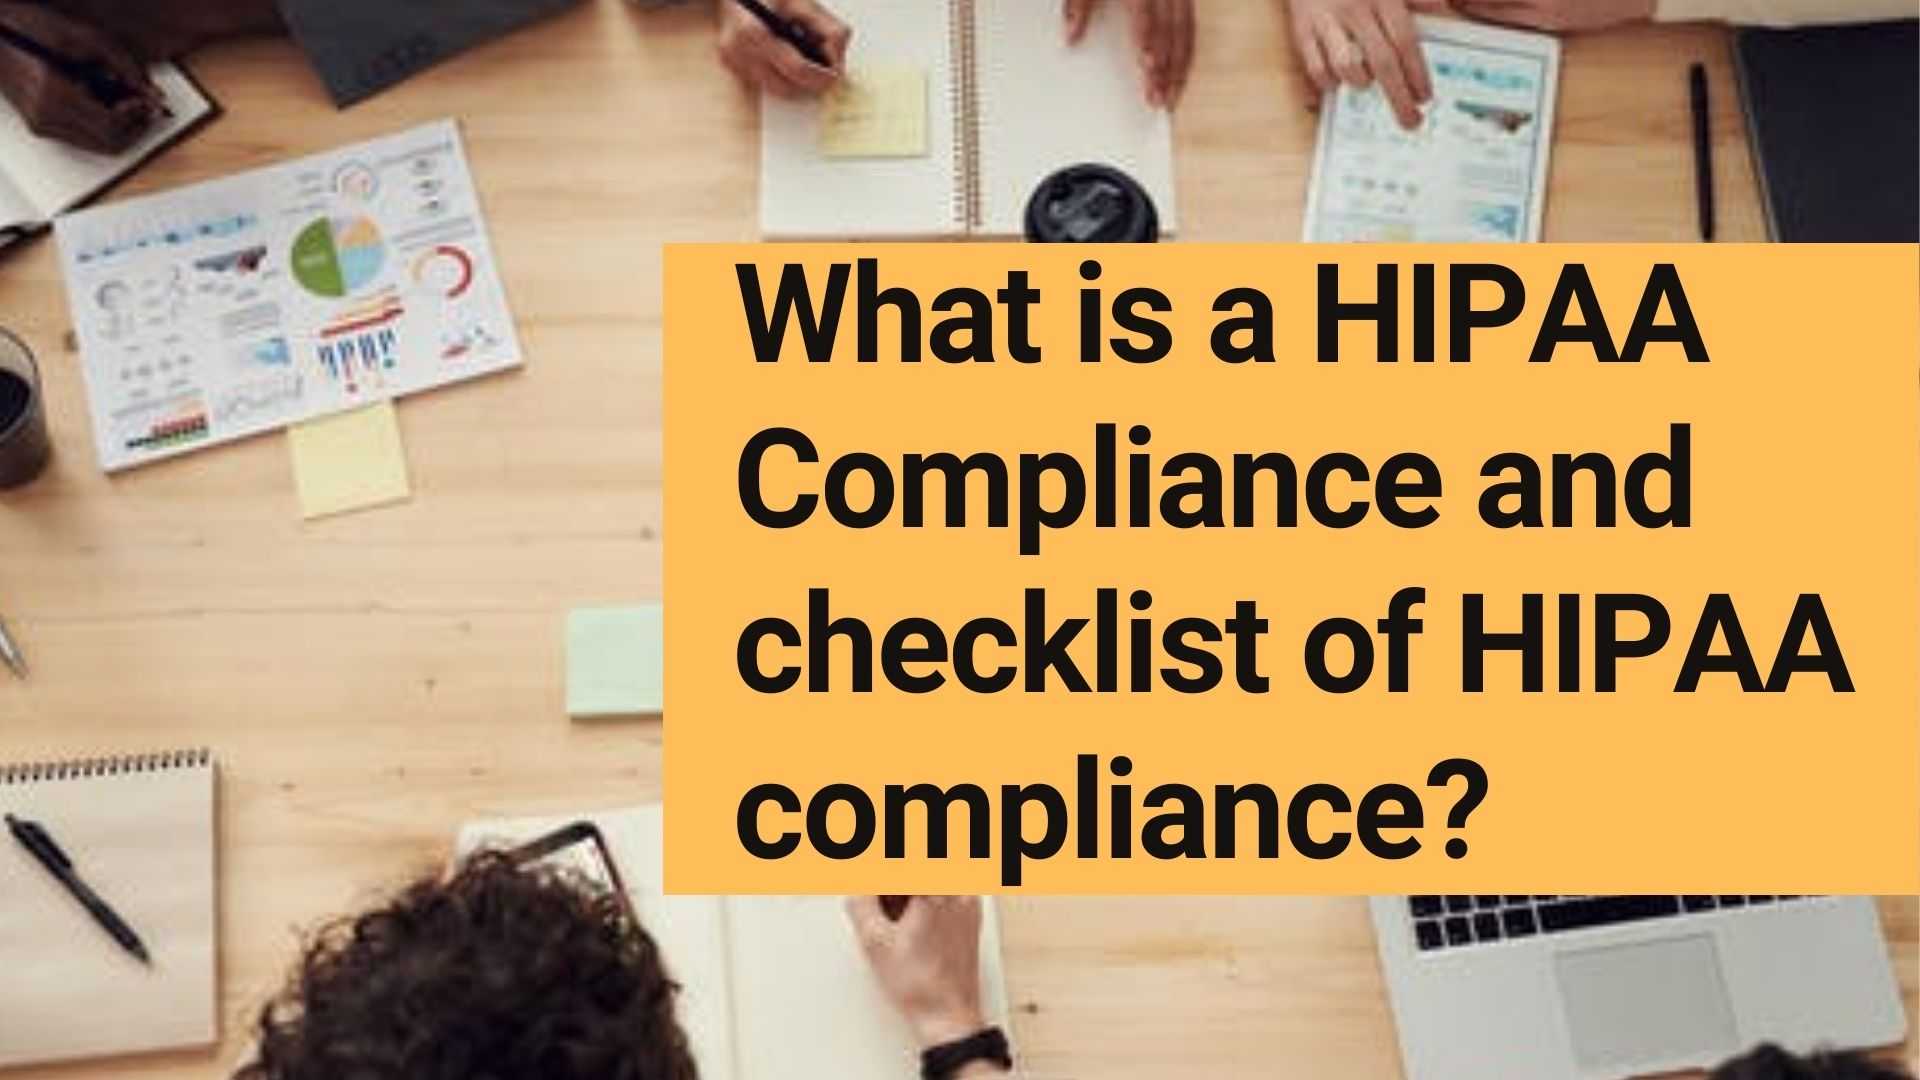 What is a HIPAA Compliance and checklist of HIPAA compliance?